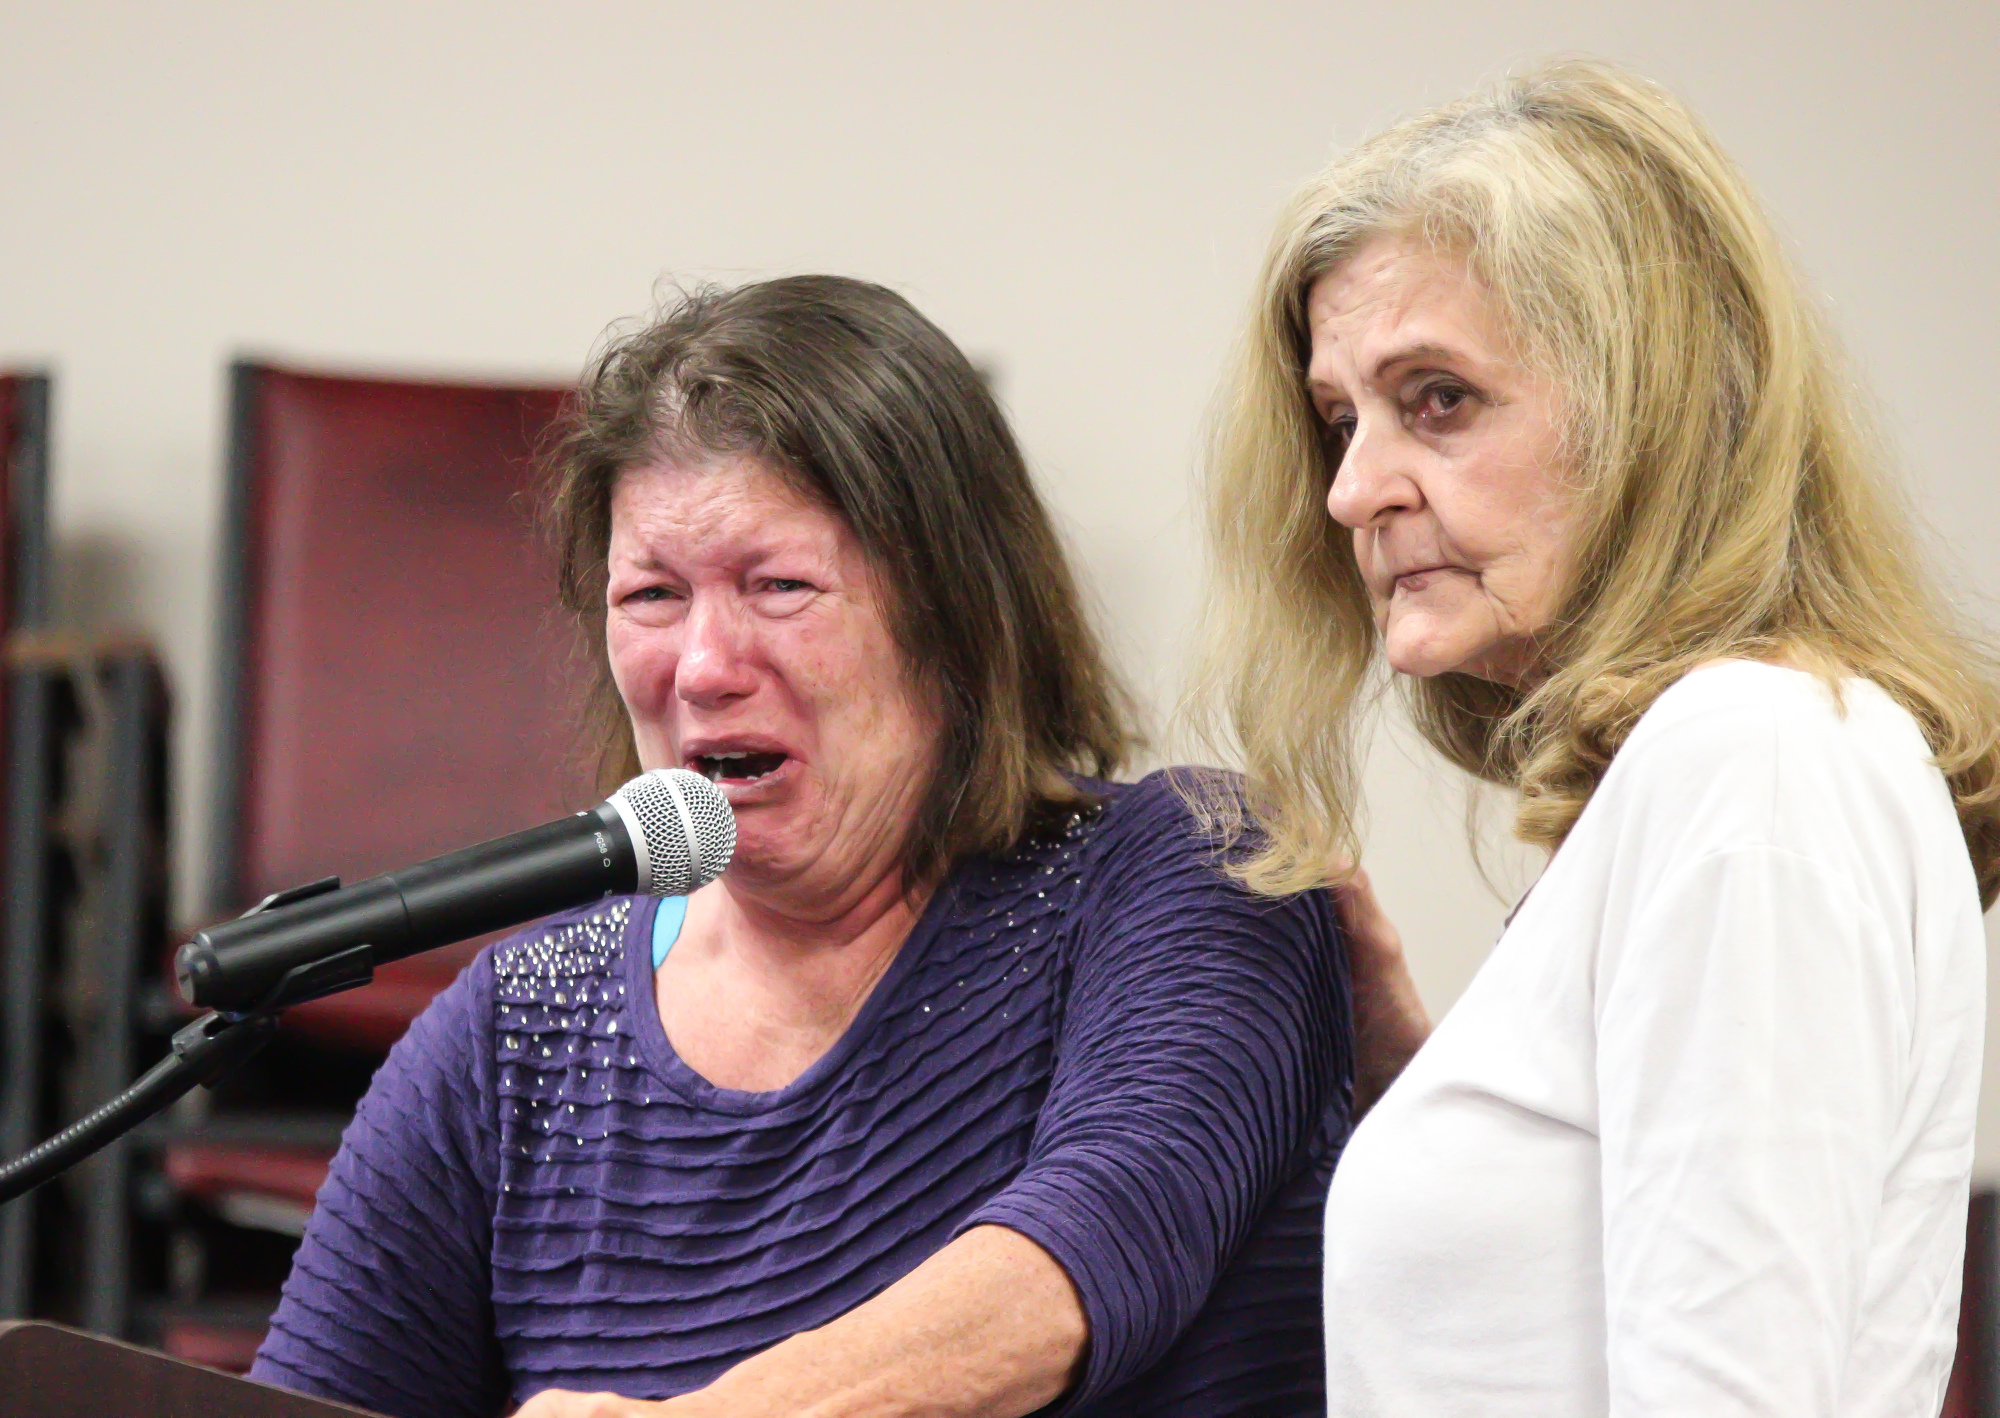 Bonnie Weygandt, who said she became homeless after her husband decided he didn't love her anymore, recalls her story to the council with fellow homeless woman Phyllis Adams consoling her. Photo by Ray Boone